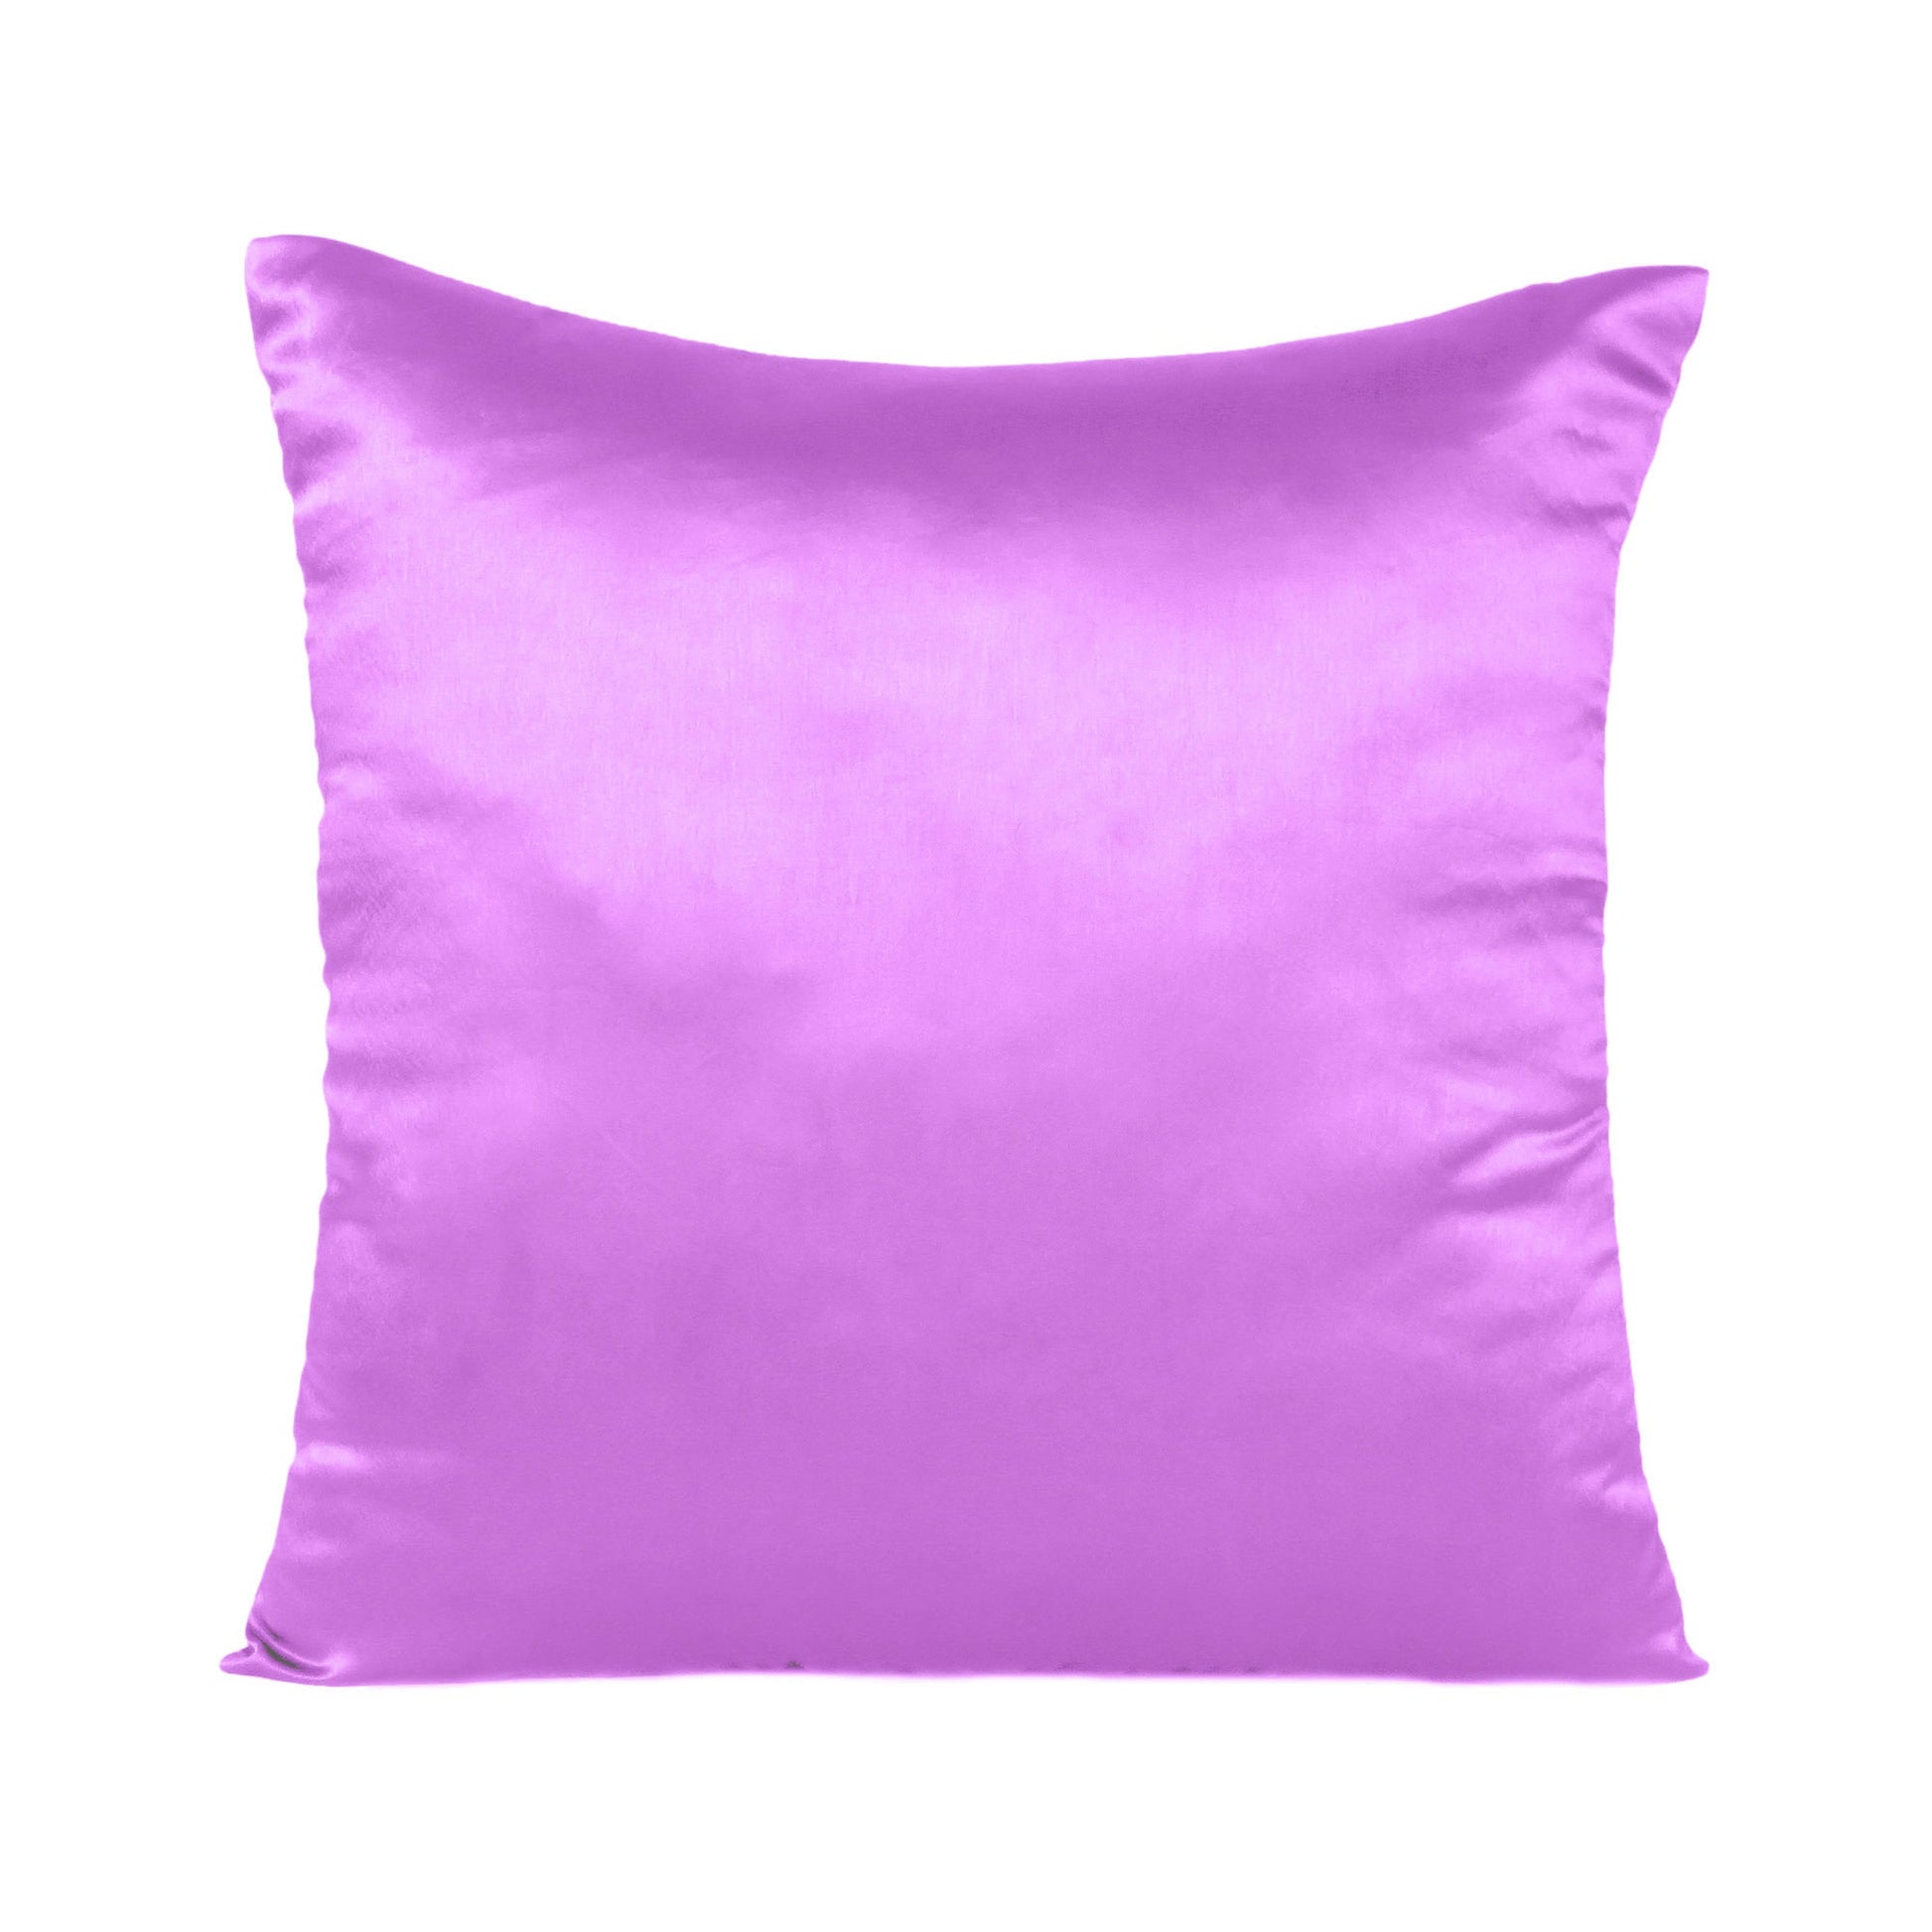 Hyacinth Violet Satin Silky Cushion Covers in Set of 2